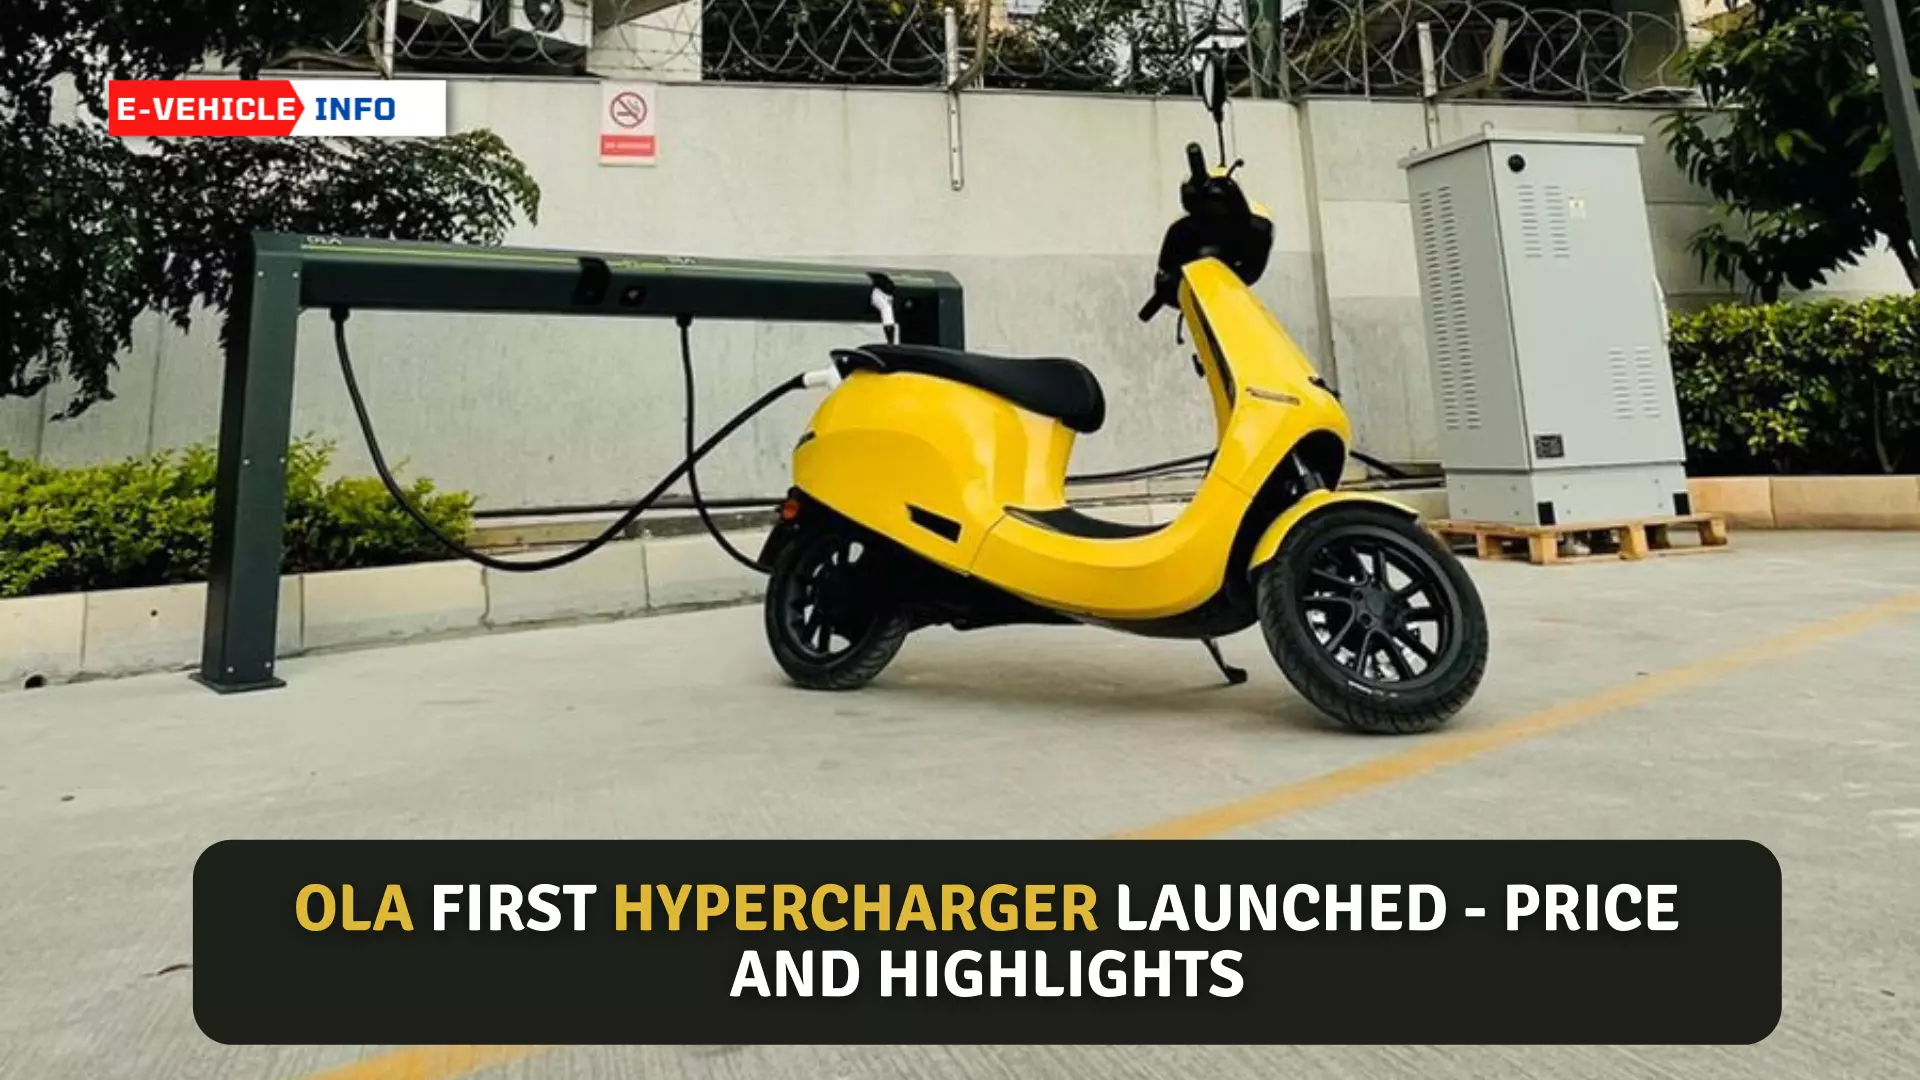 https://e-vehicleinfo.com/ola-first-hypercharger-launched-price-and-highlights/